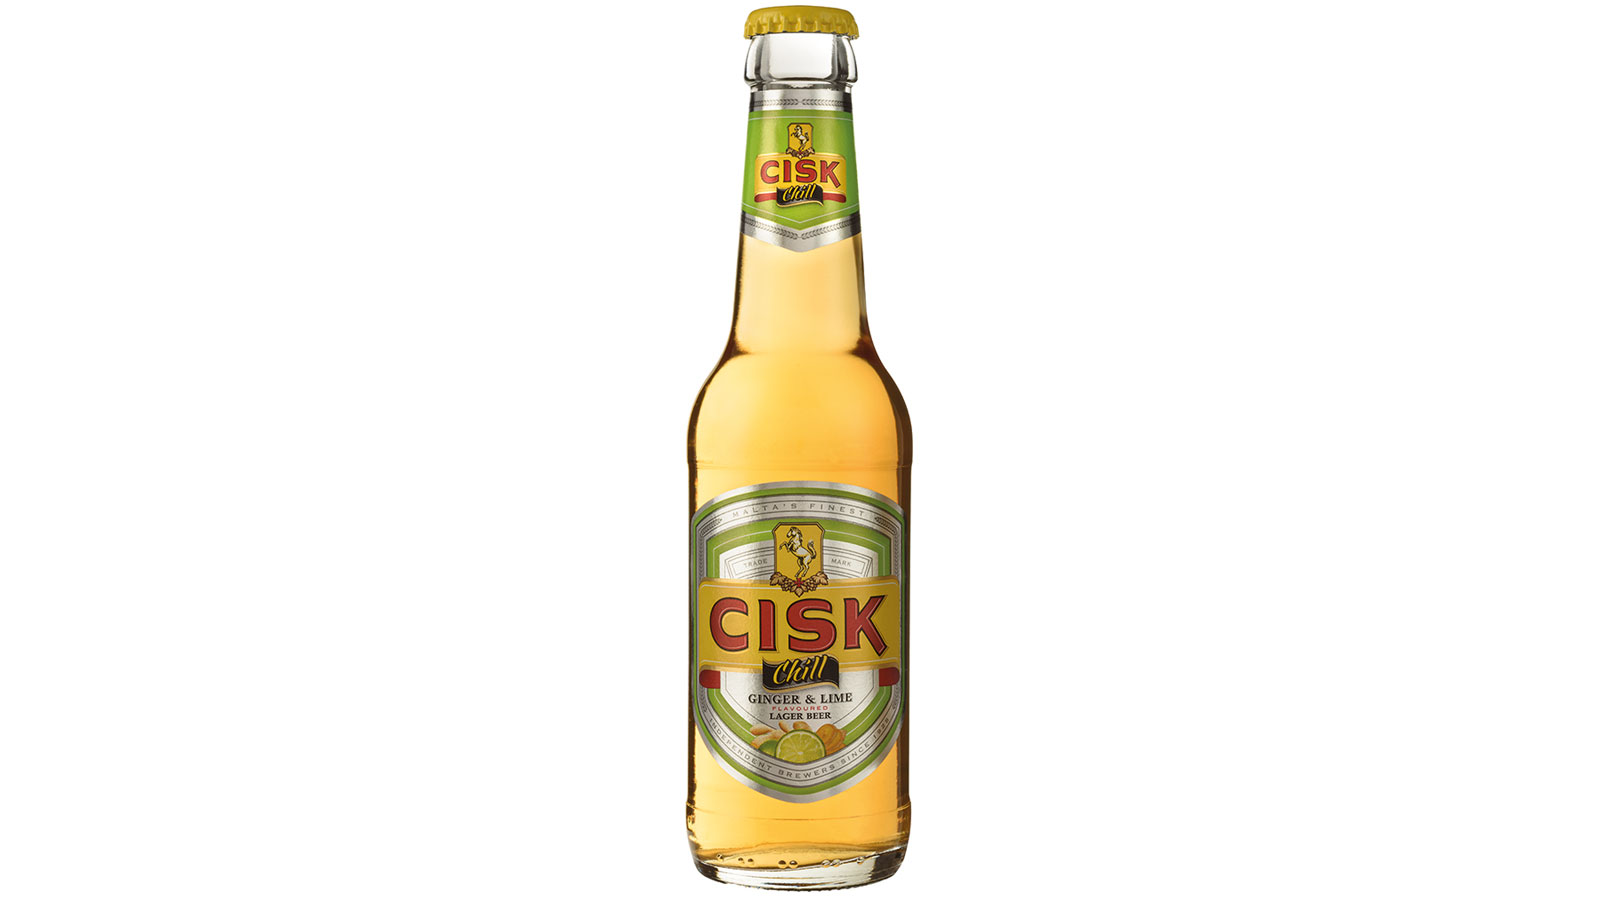 Cisk Chill Ginger & Lime – the new addition to the Cisk range of flavoured beers 